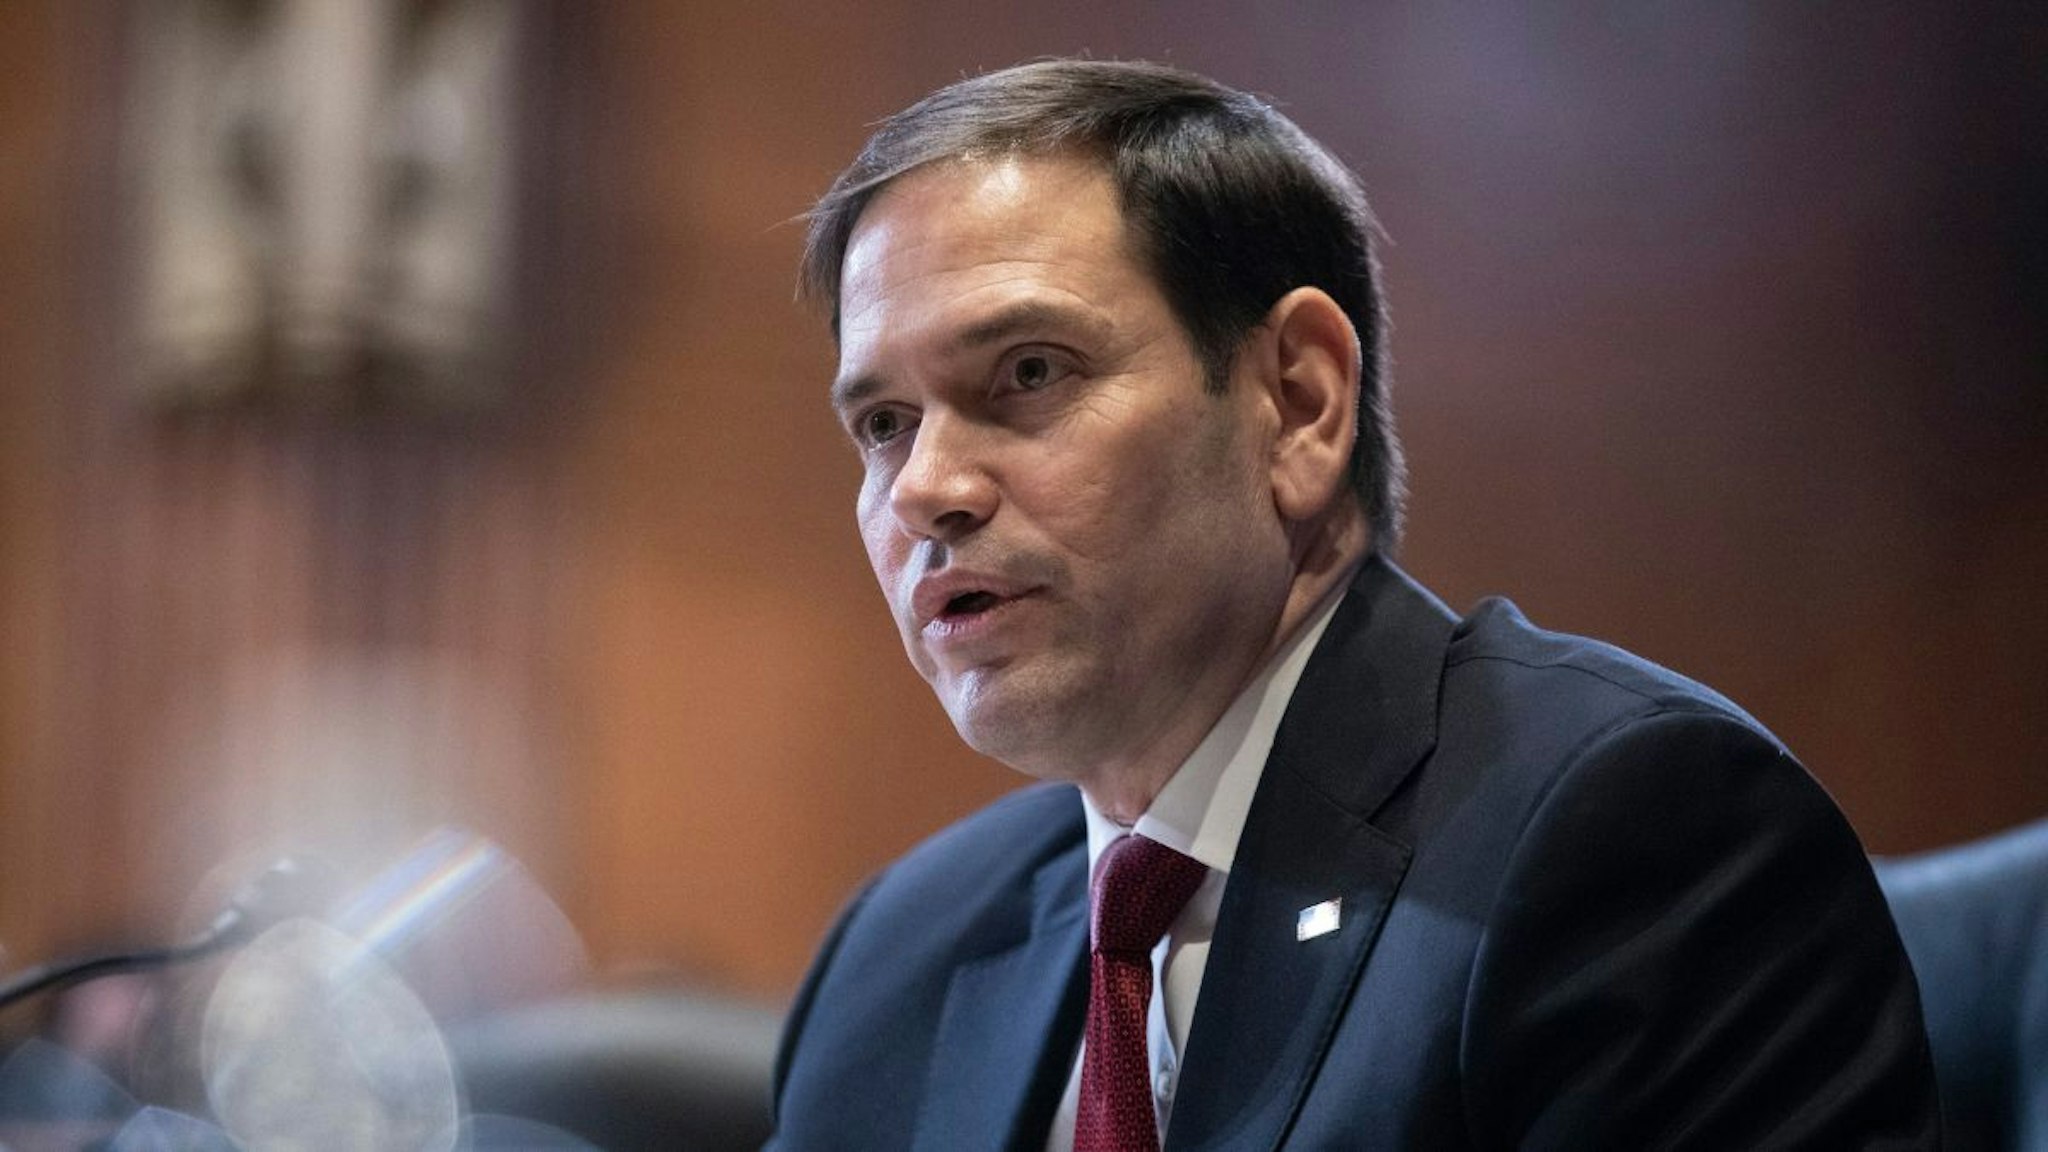 Sen. Marco Rubio (R-FL) speaks during a Senate Appropriations Subcommittee on Labor, Health and Human Services, Education, and Related Agencies hearing on Capitol Hill on May 17, 2022 in Washington, DC.